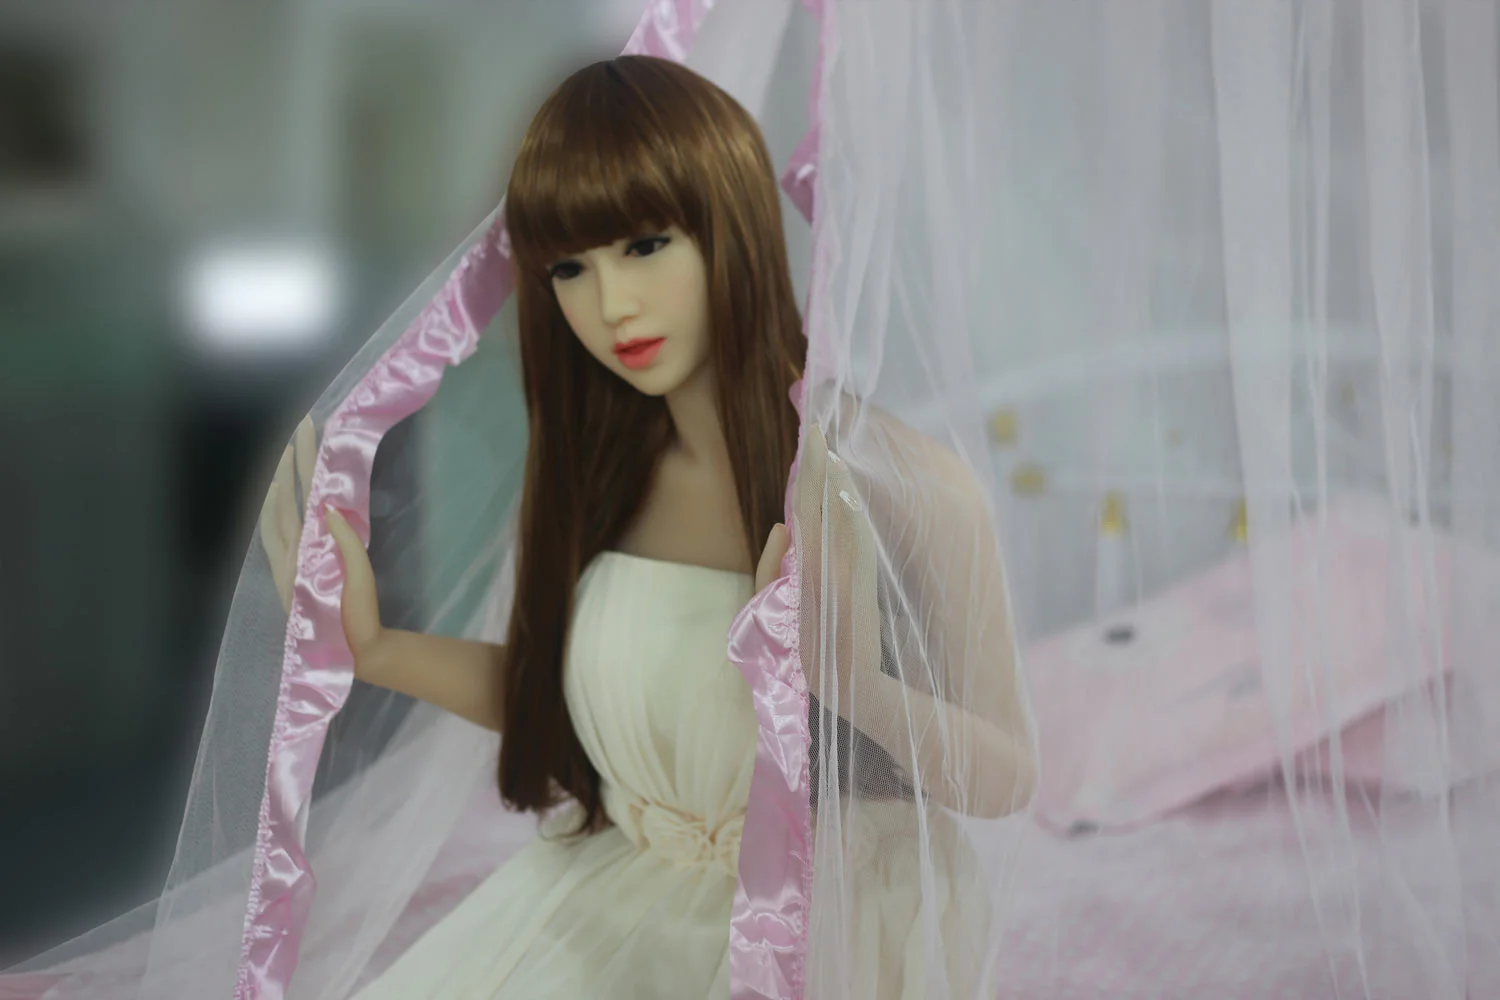 Sex doll with hands holding mosquito net